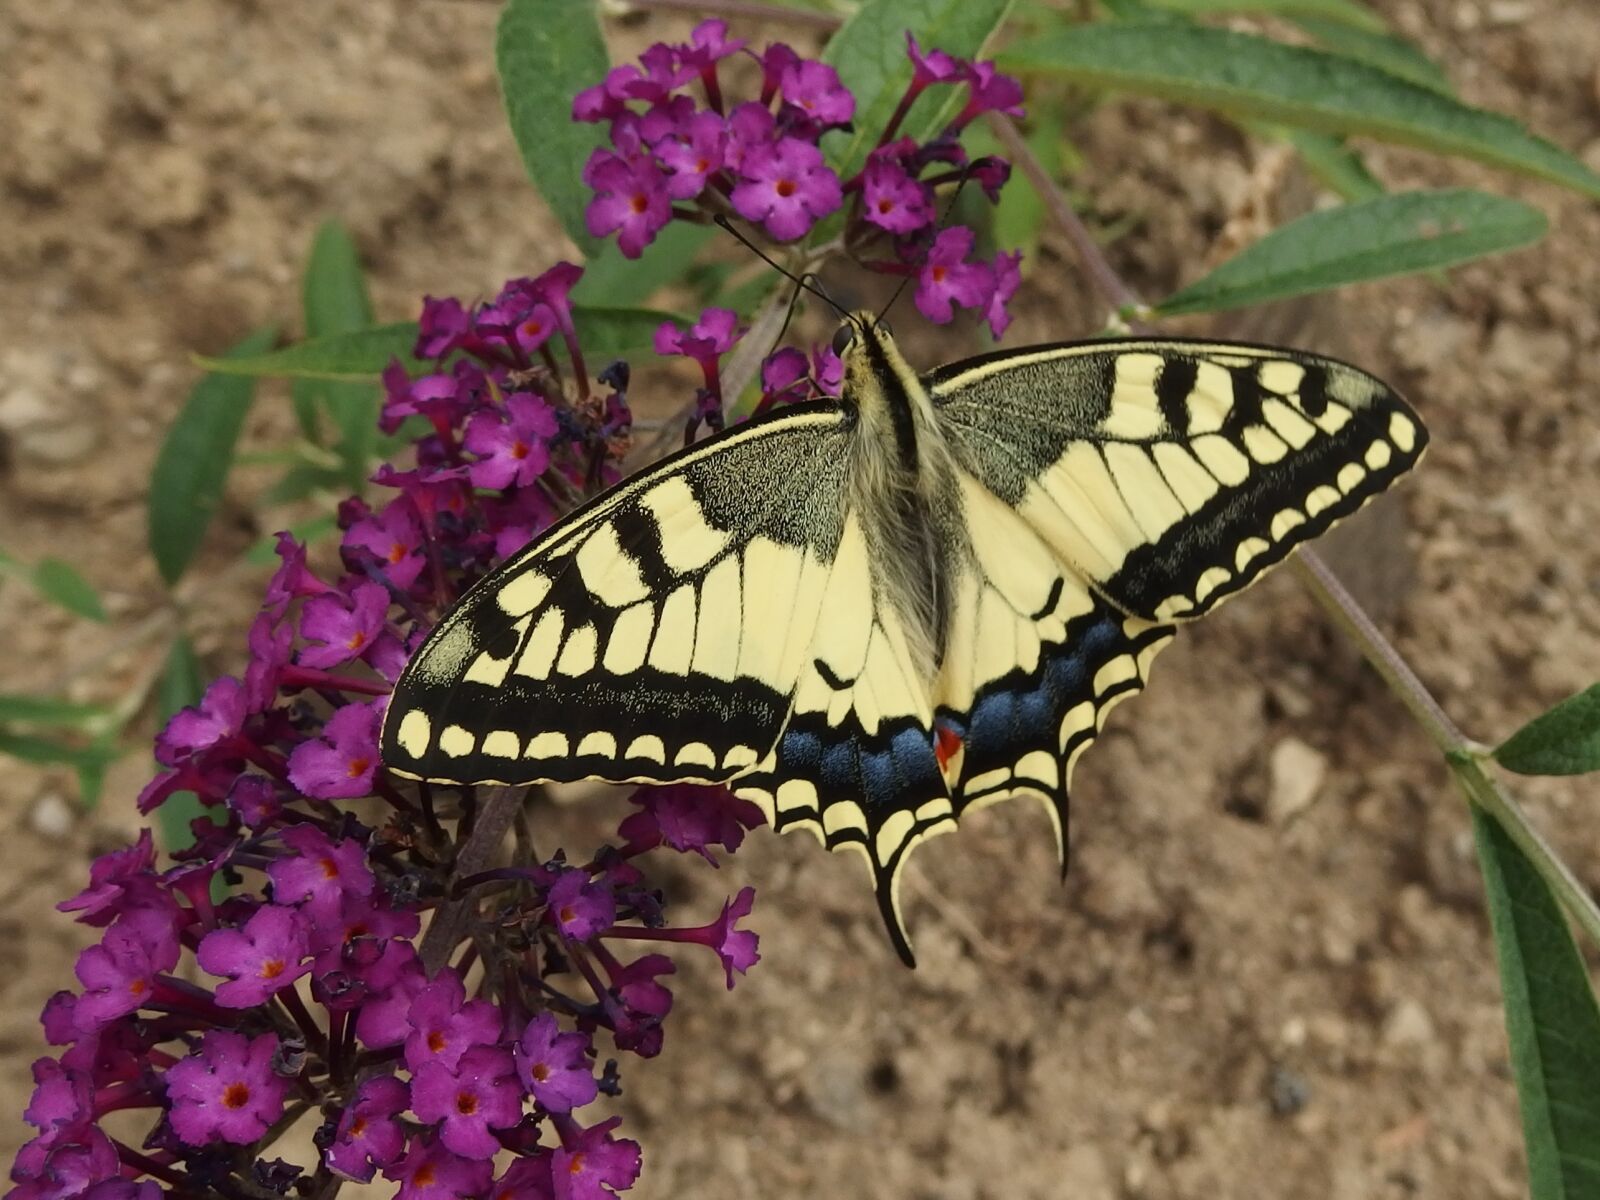 Olympus Stylus XZ-10 sample photo. Swallowtail, butterfly, butterfly wings photography